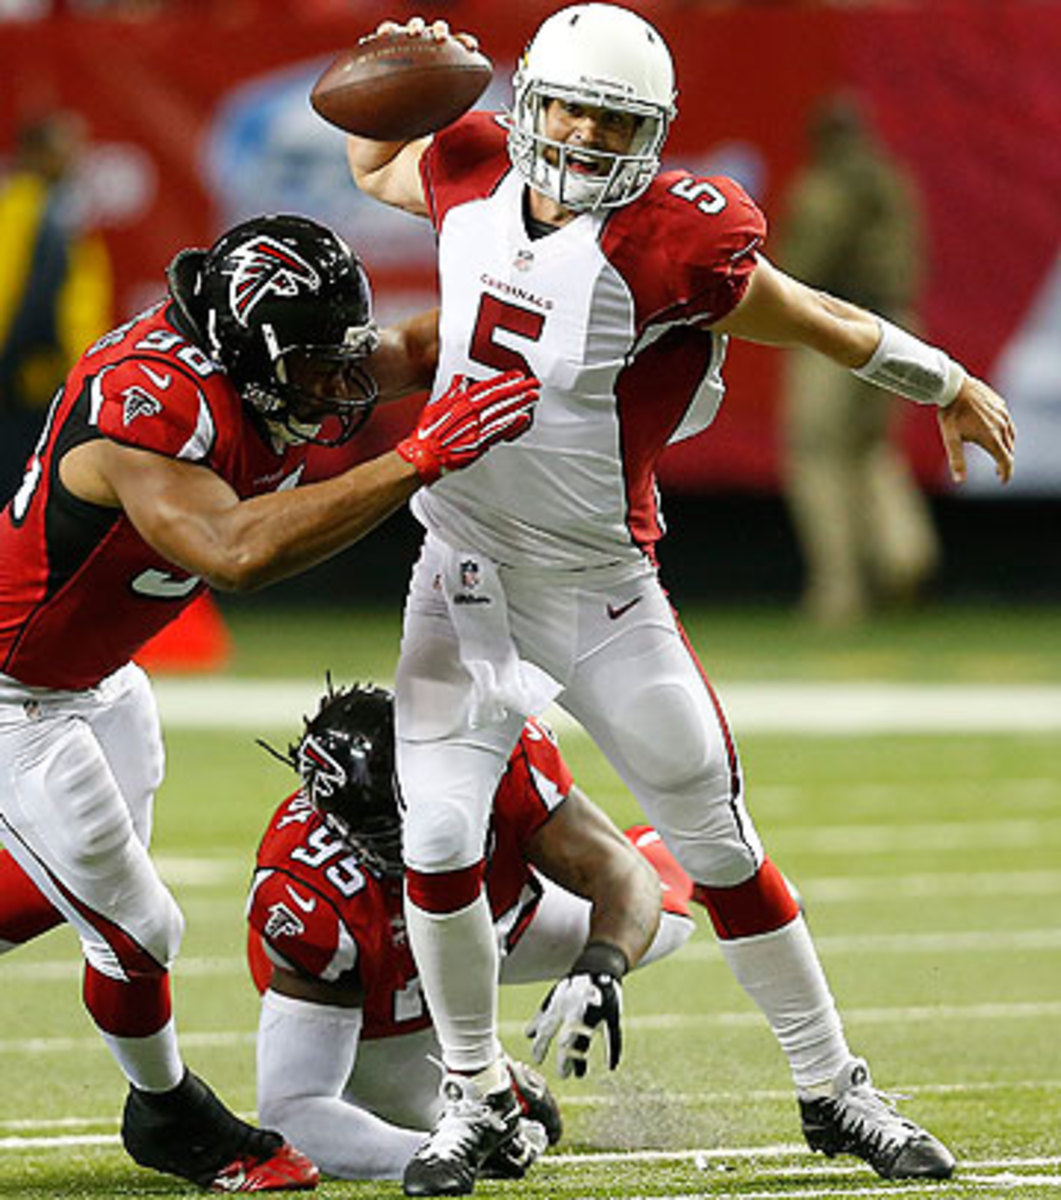 Drew Stanton has five interceptions over the past three games, and the Cards are 1-2 in that stretch. (John Bazemore/AP)